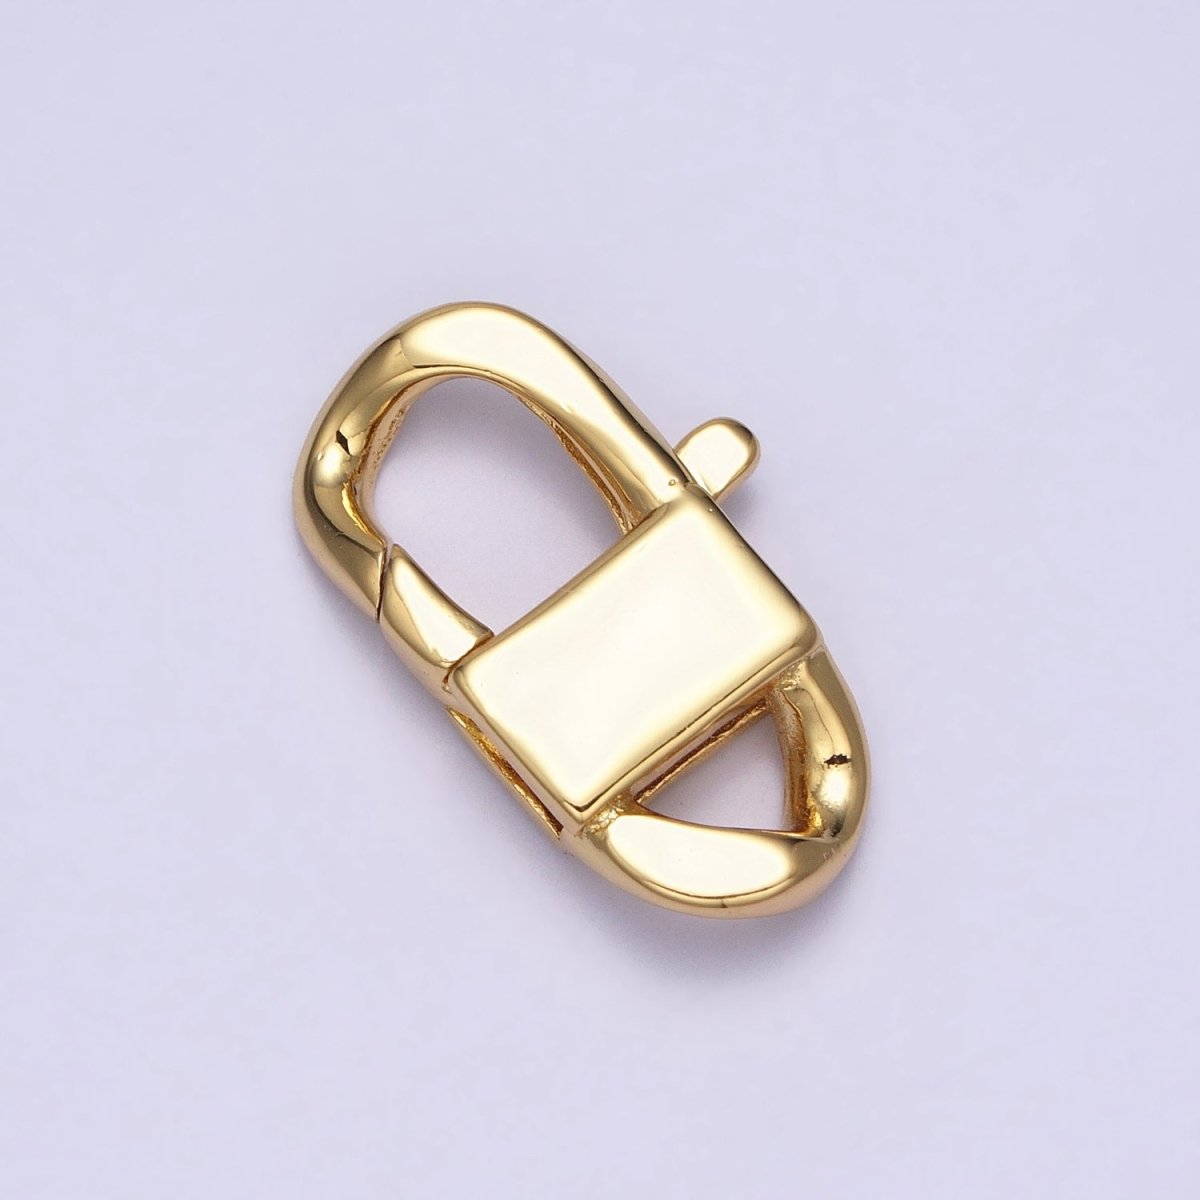 Gold Filled Lobster Clasp with Closed Rings Silver Rectangle Trigger Clasps For Bracelet Jewelry Making Supplies Z-190 Z-191 - DLUXCA